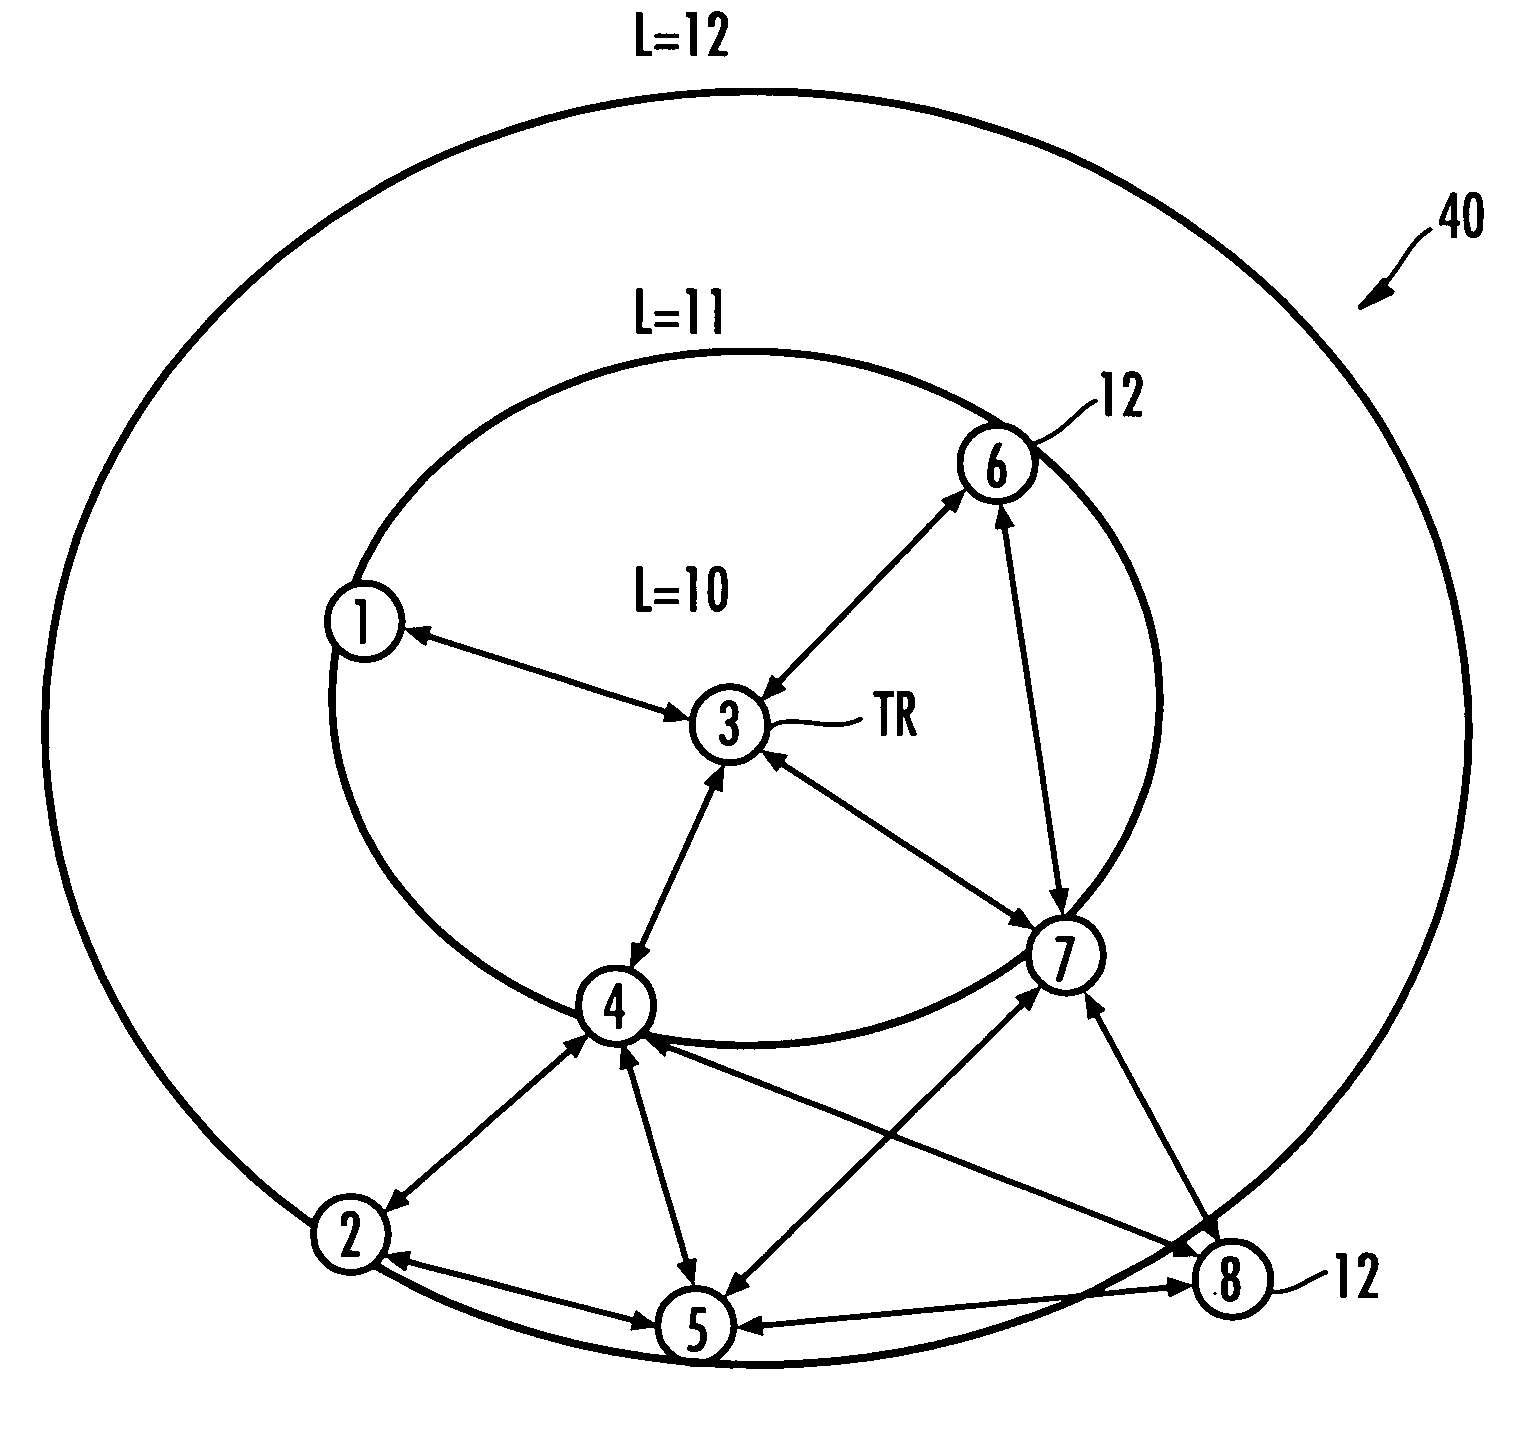 Synchronization and timing source priority in an ad-hoc network